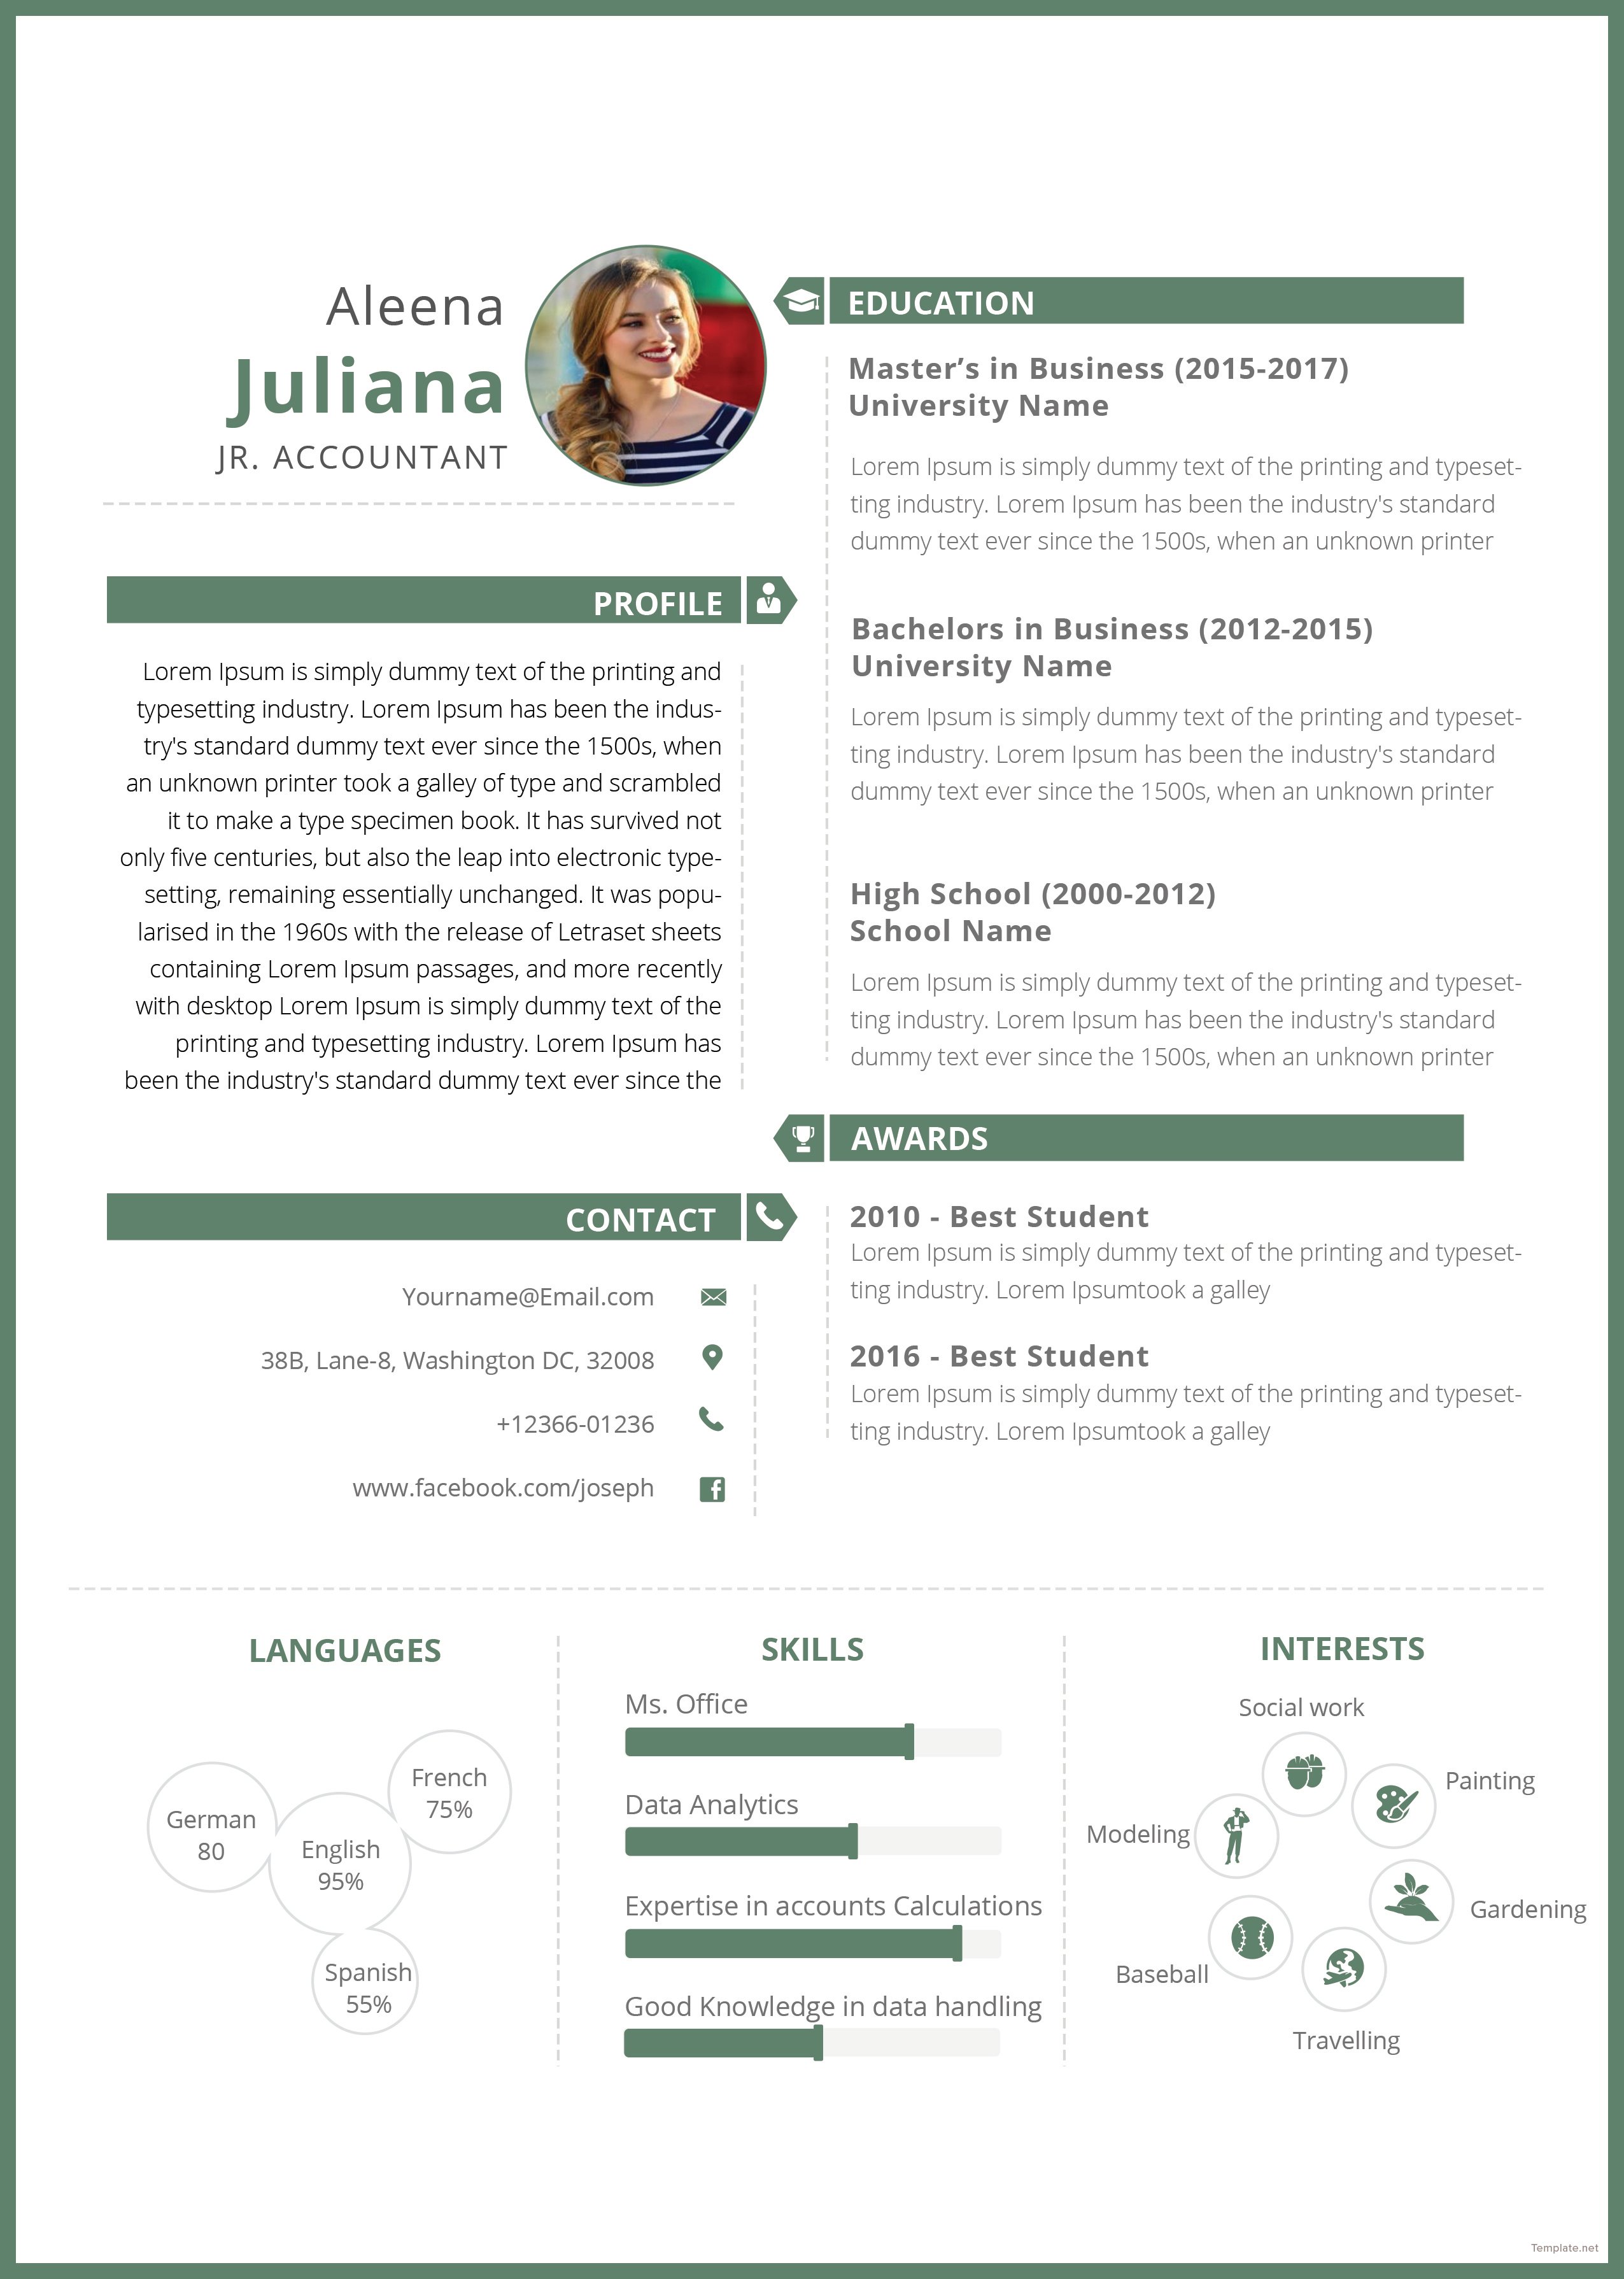 free-junior-accountant-resume-template-in-adobe-photoshop-indesign